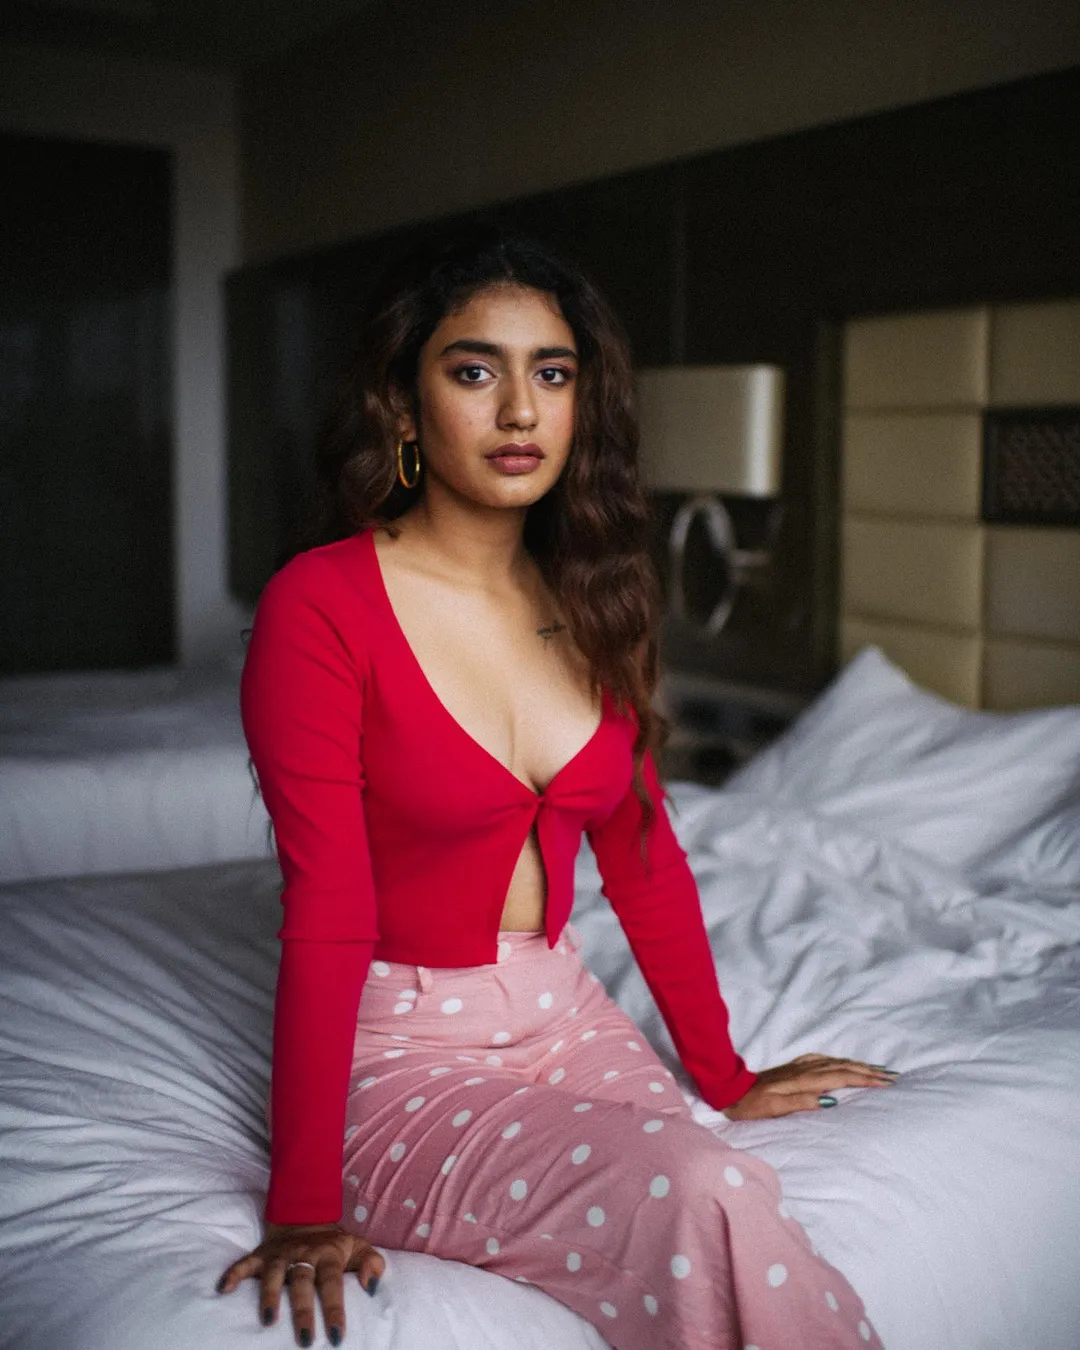 Priya Prakash Varrier drops some smoldering pictures from her latest photoshoot with a red top and pink polka dot trousers.